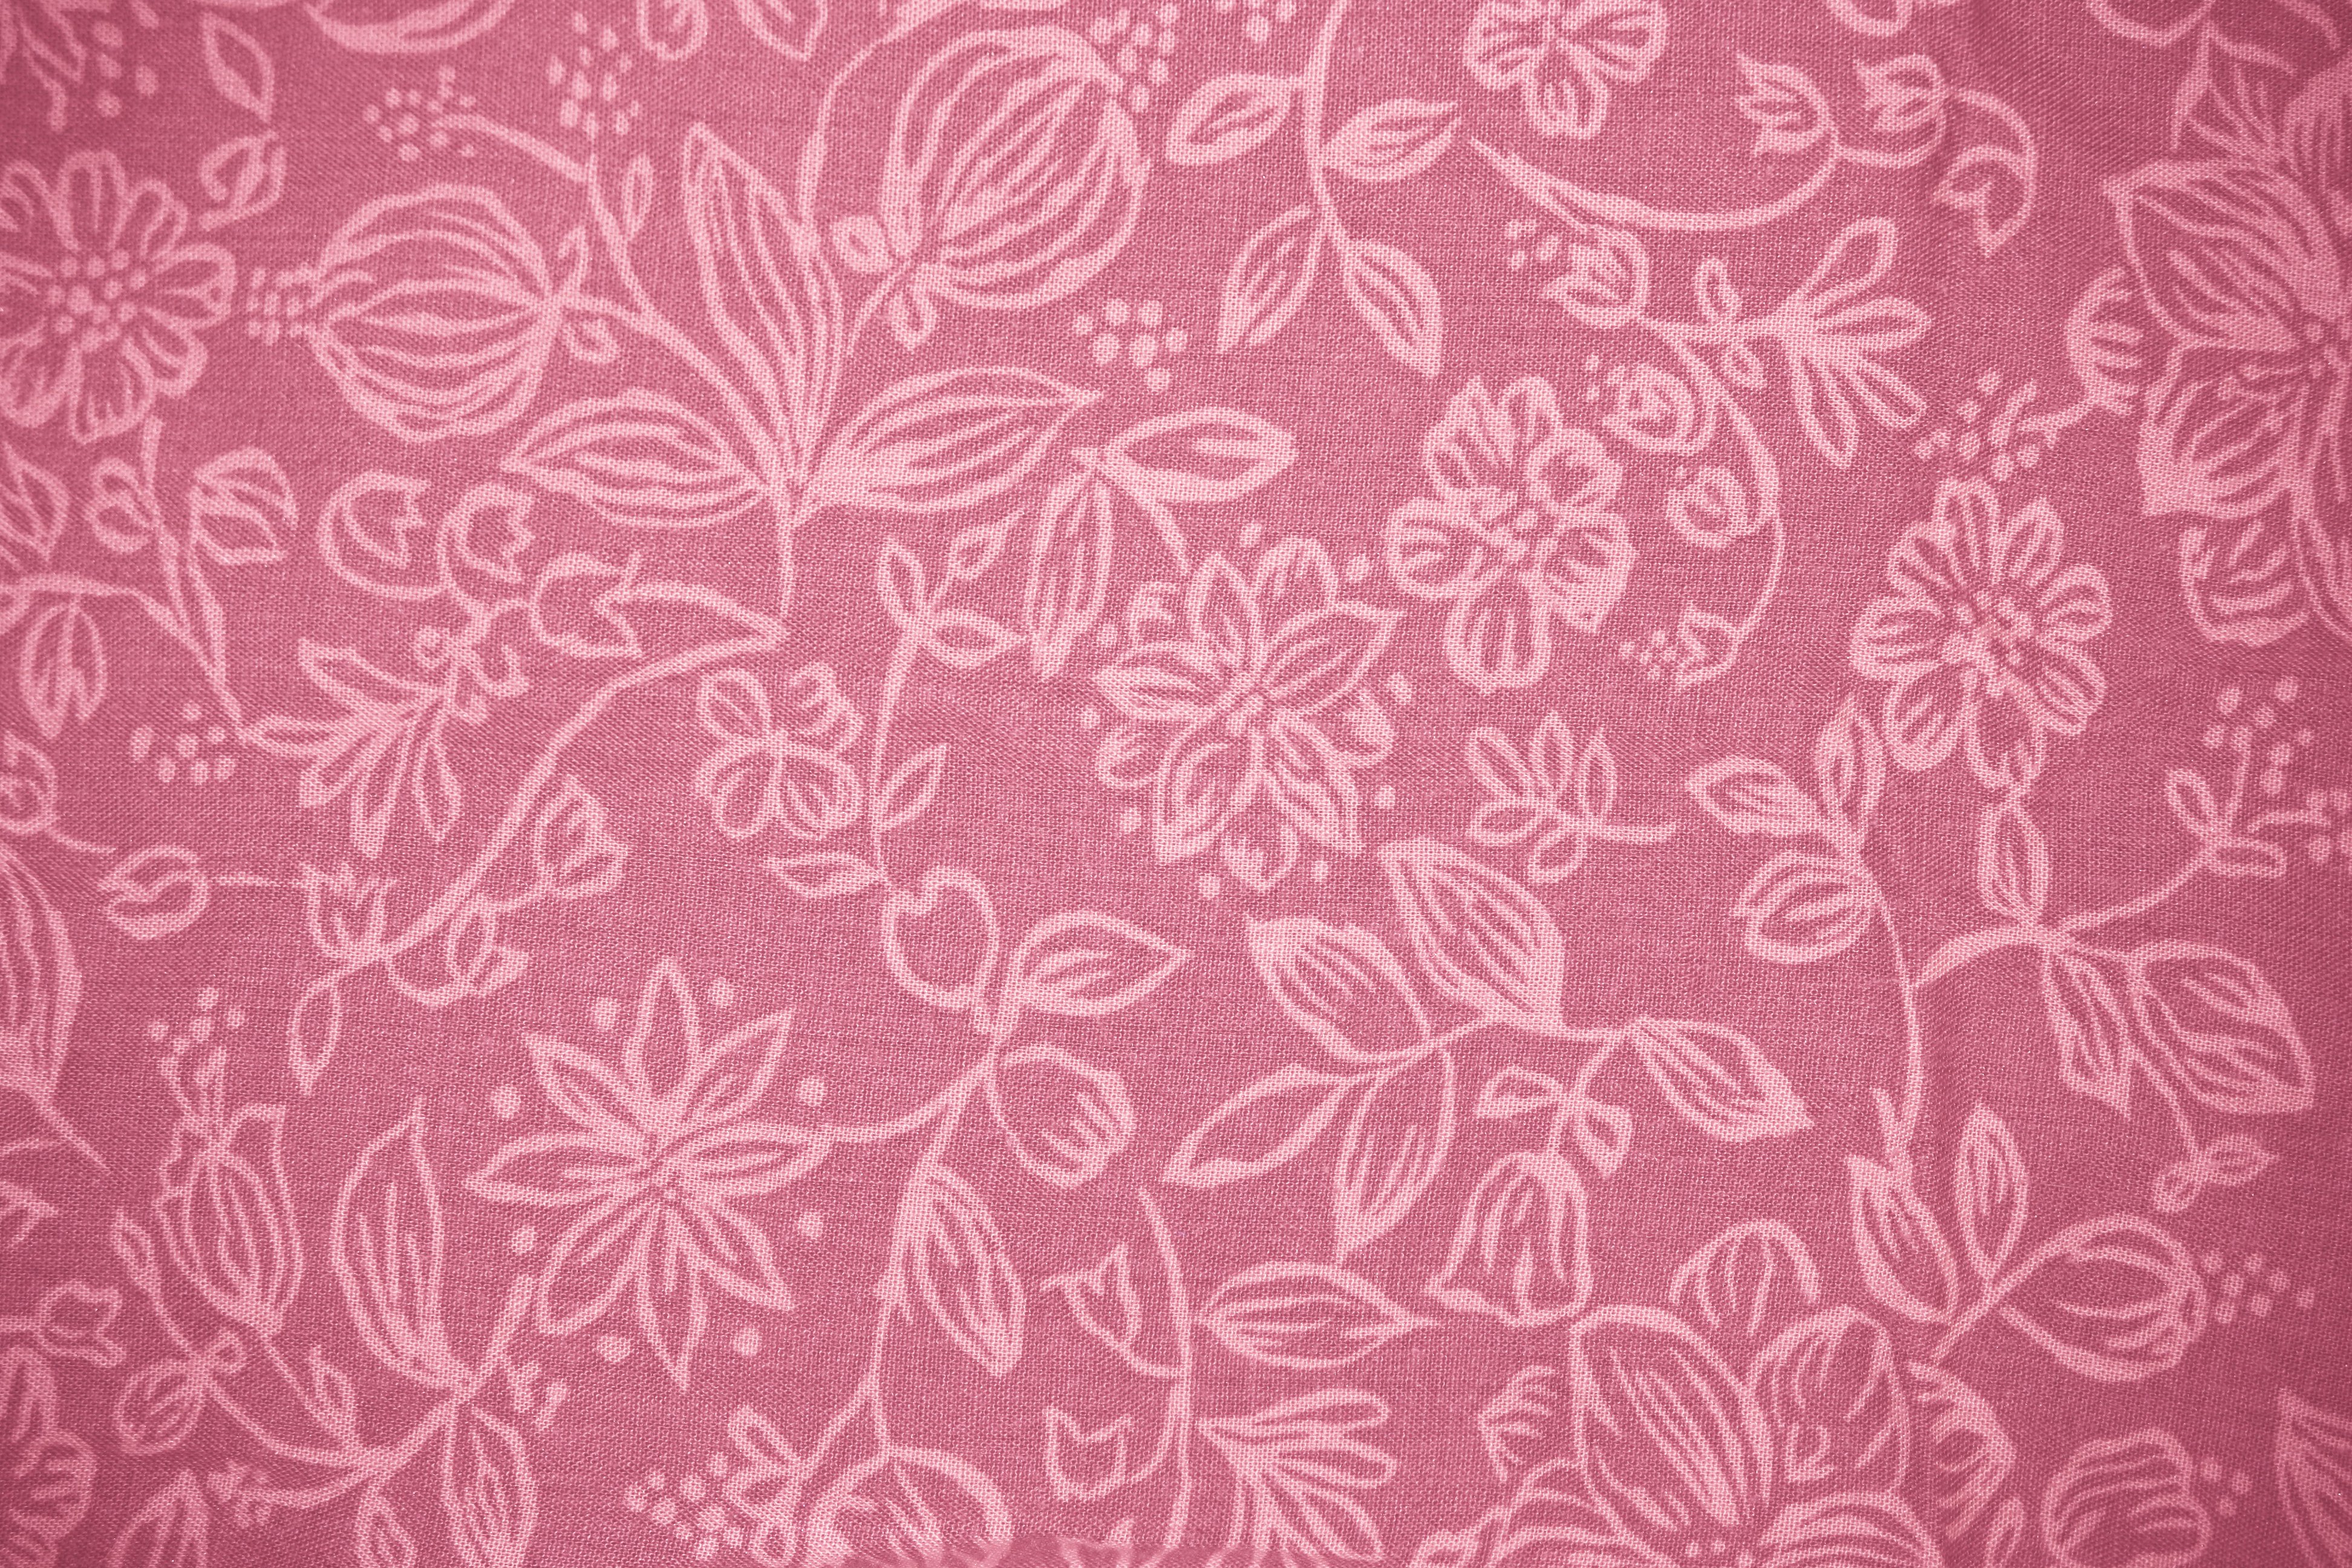 Coral Colored Fabric with Floral Pattern Texture Picture Free